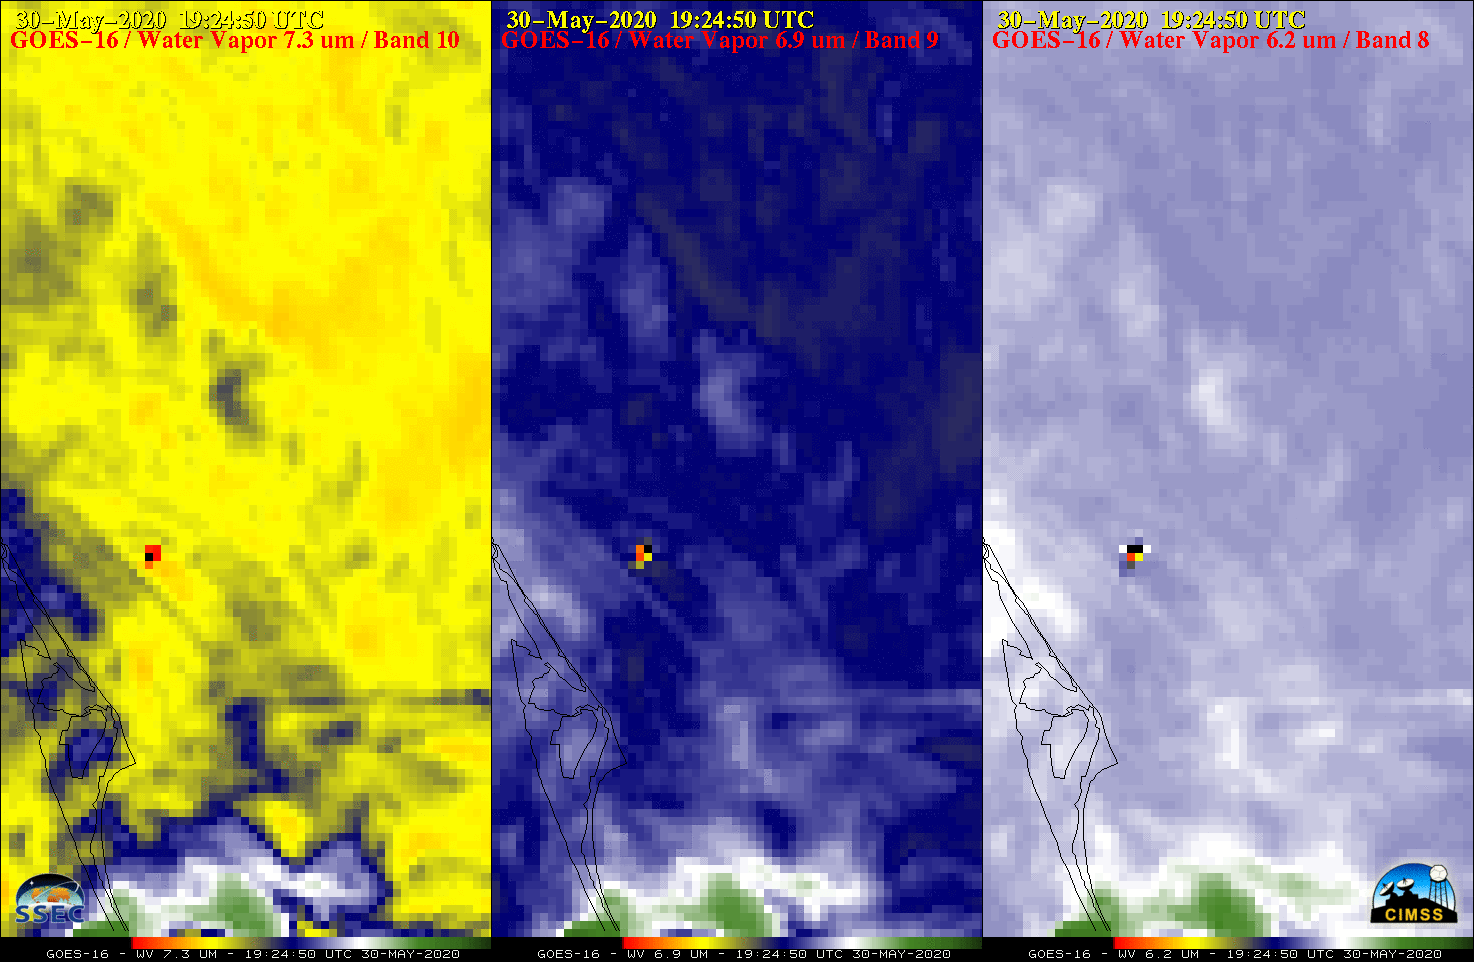 GOES-16 Low-level (7.3 µm, left), Mid-level (6.9 µm, center) and Upper-level (6.2 µm, left) Water Vapor images [click to play animation | MP4]